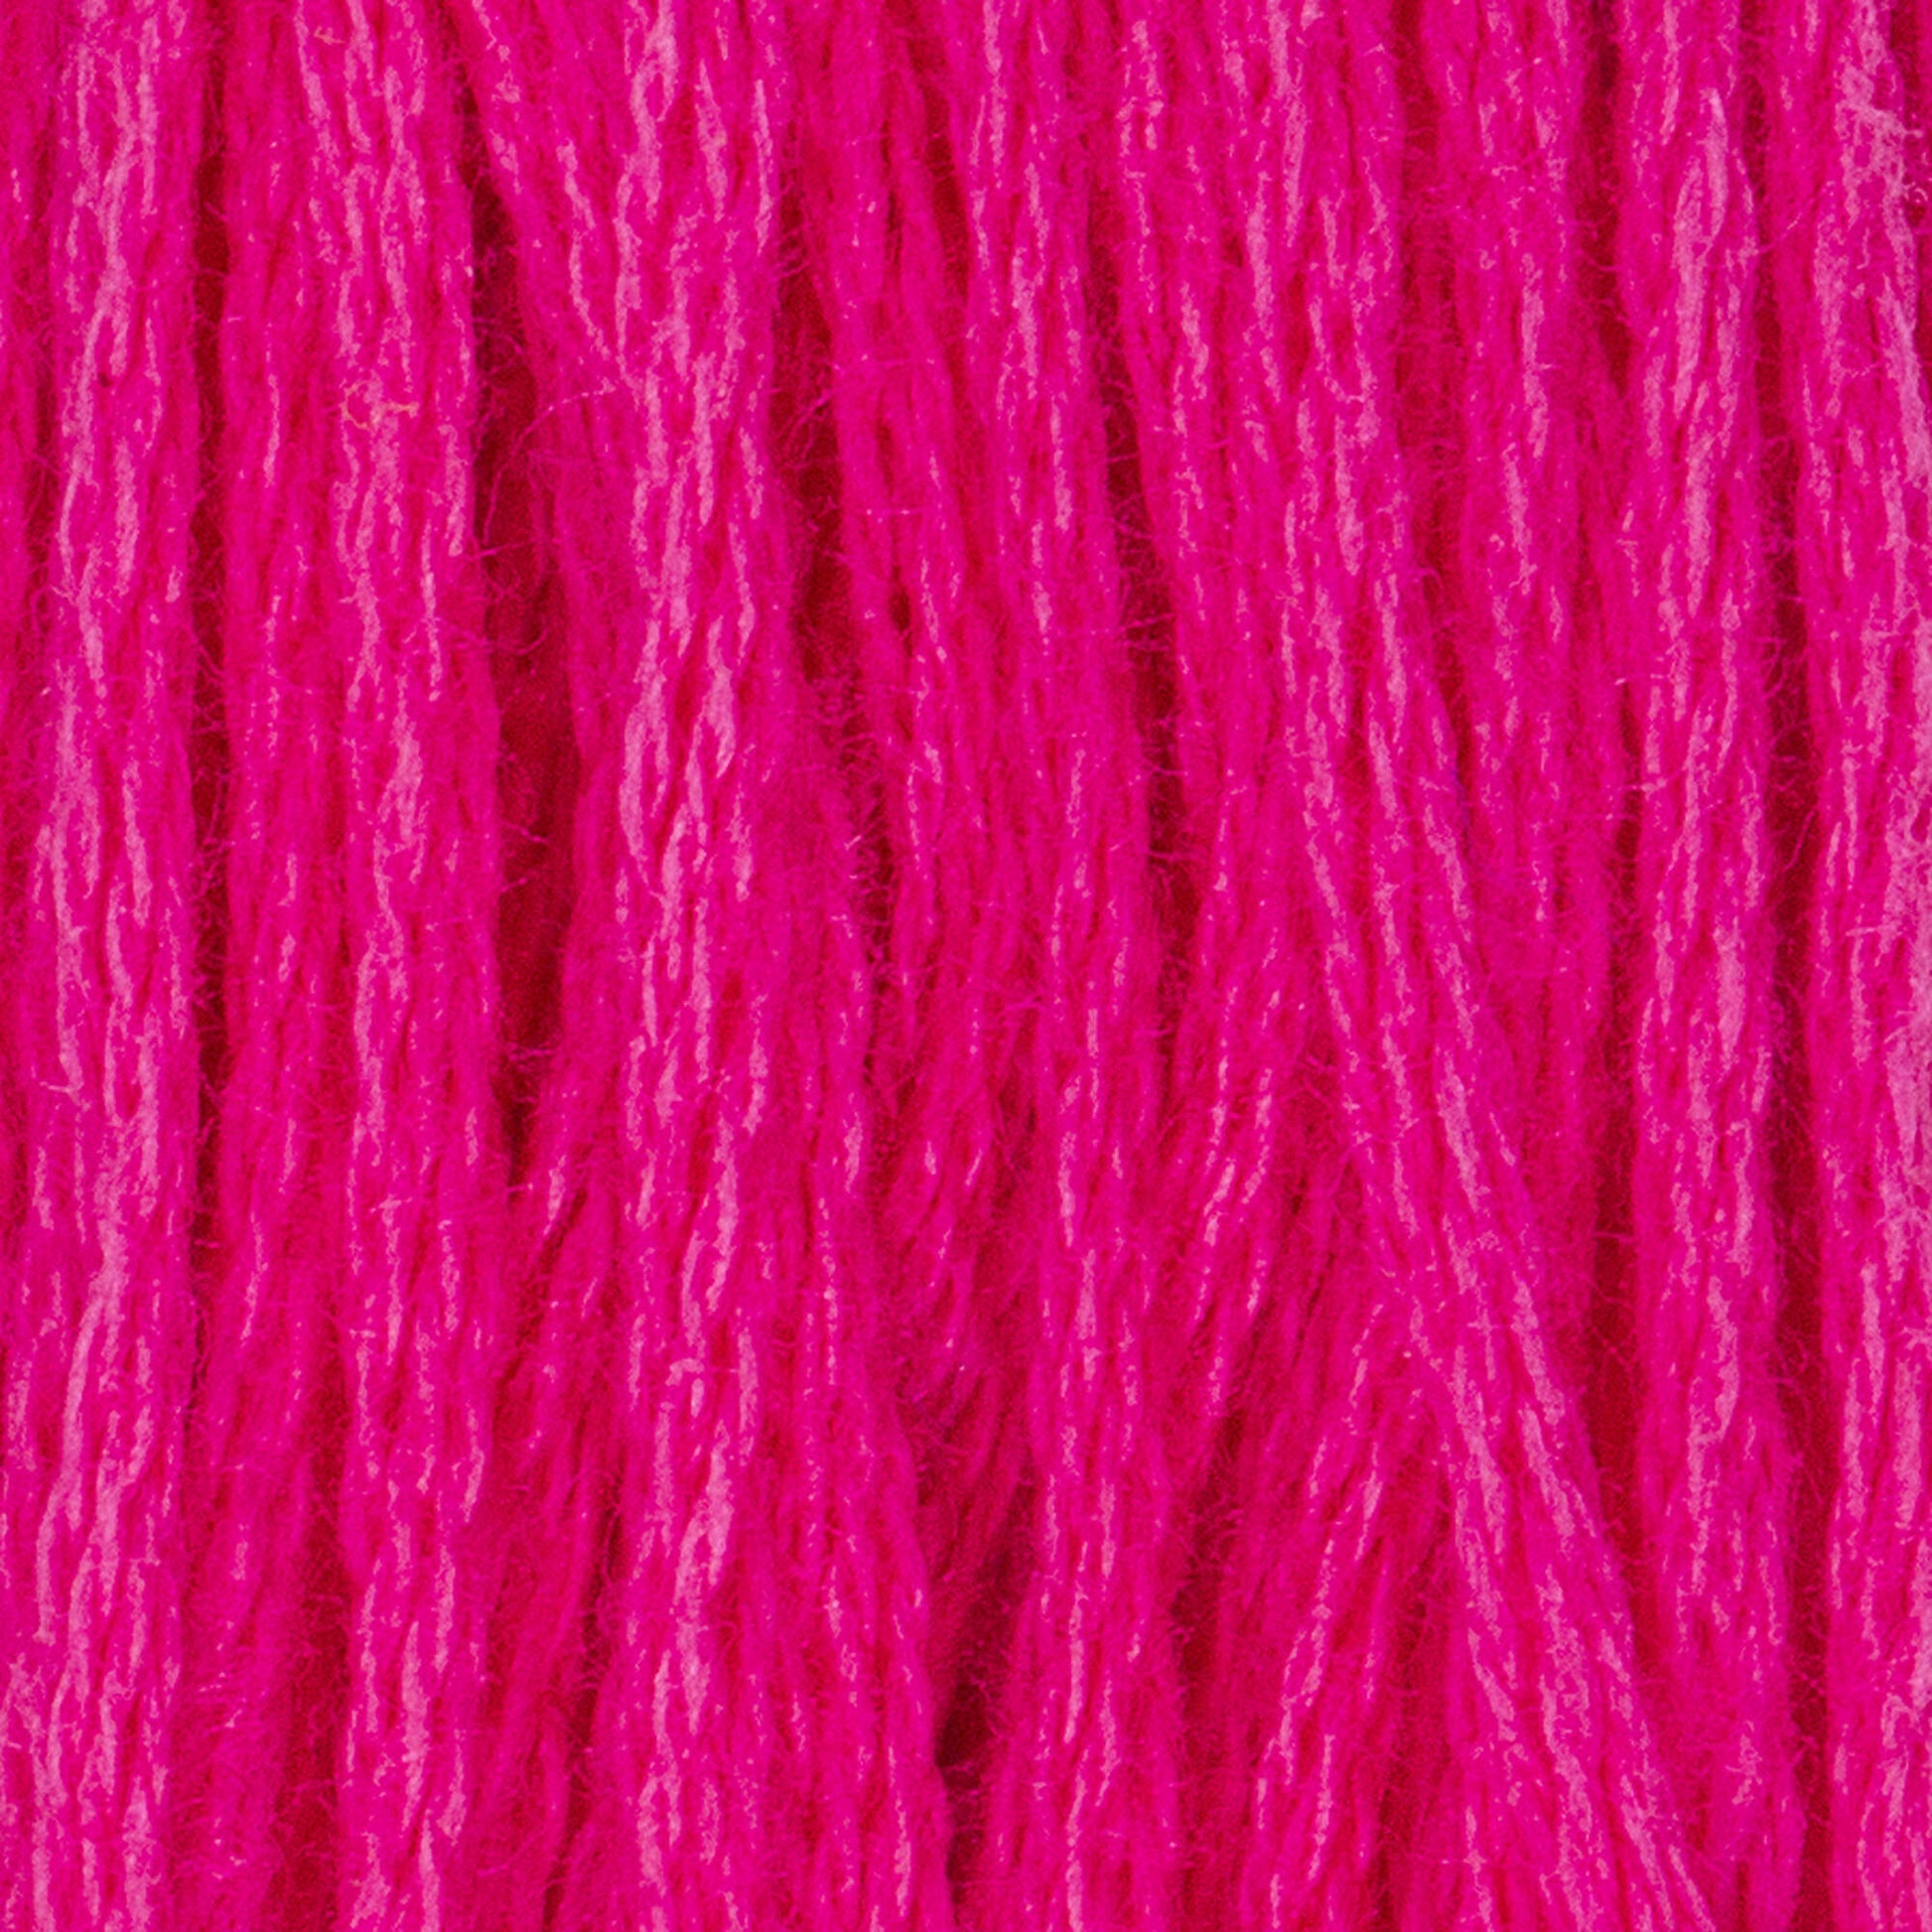 Coats & Clark C&C Trilobal Poly Embroidery 600yd Neon Pink